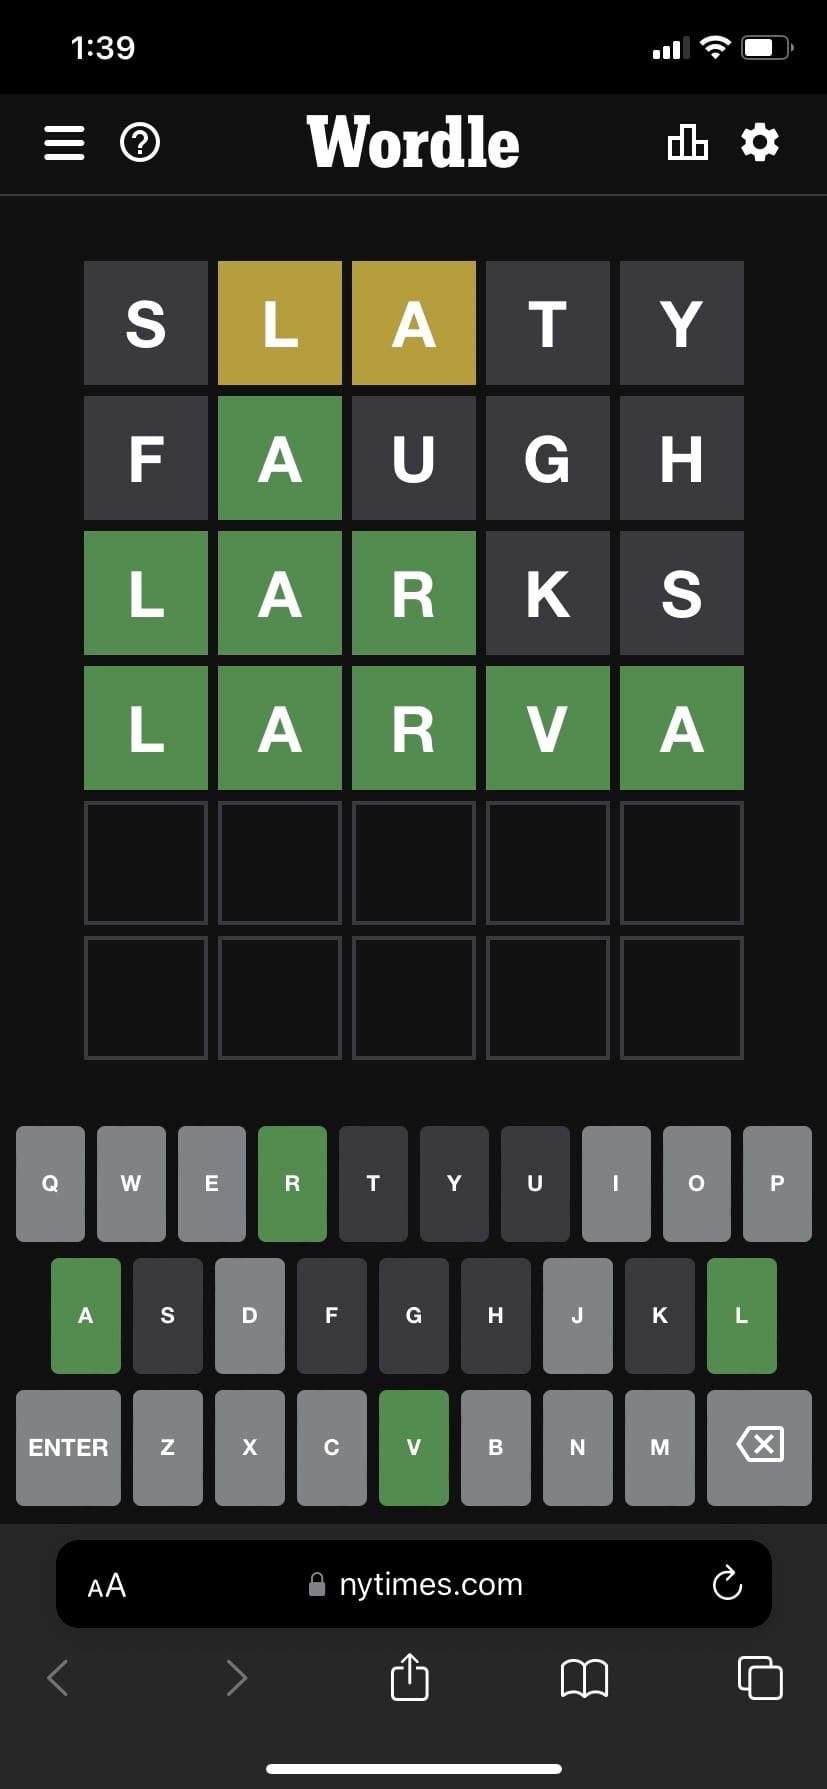 [A screenshot of the Wordle website, with four guesses and varying yellow, green, and gray tiles. Word guesses include slaty, faugh, larks, and larva with larva being the correct response.]